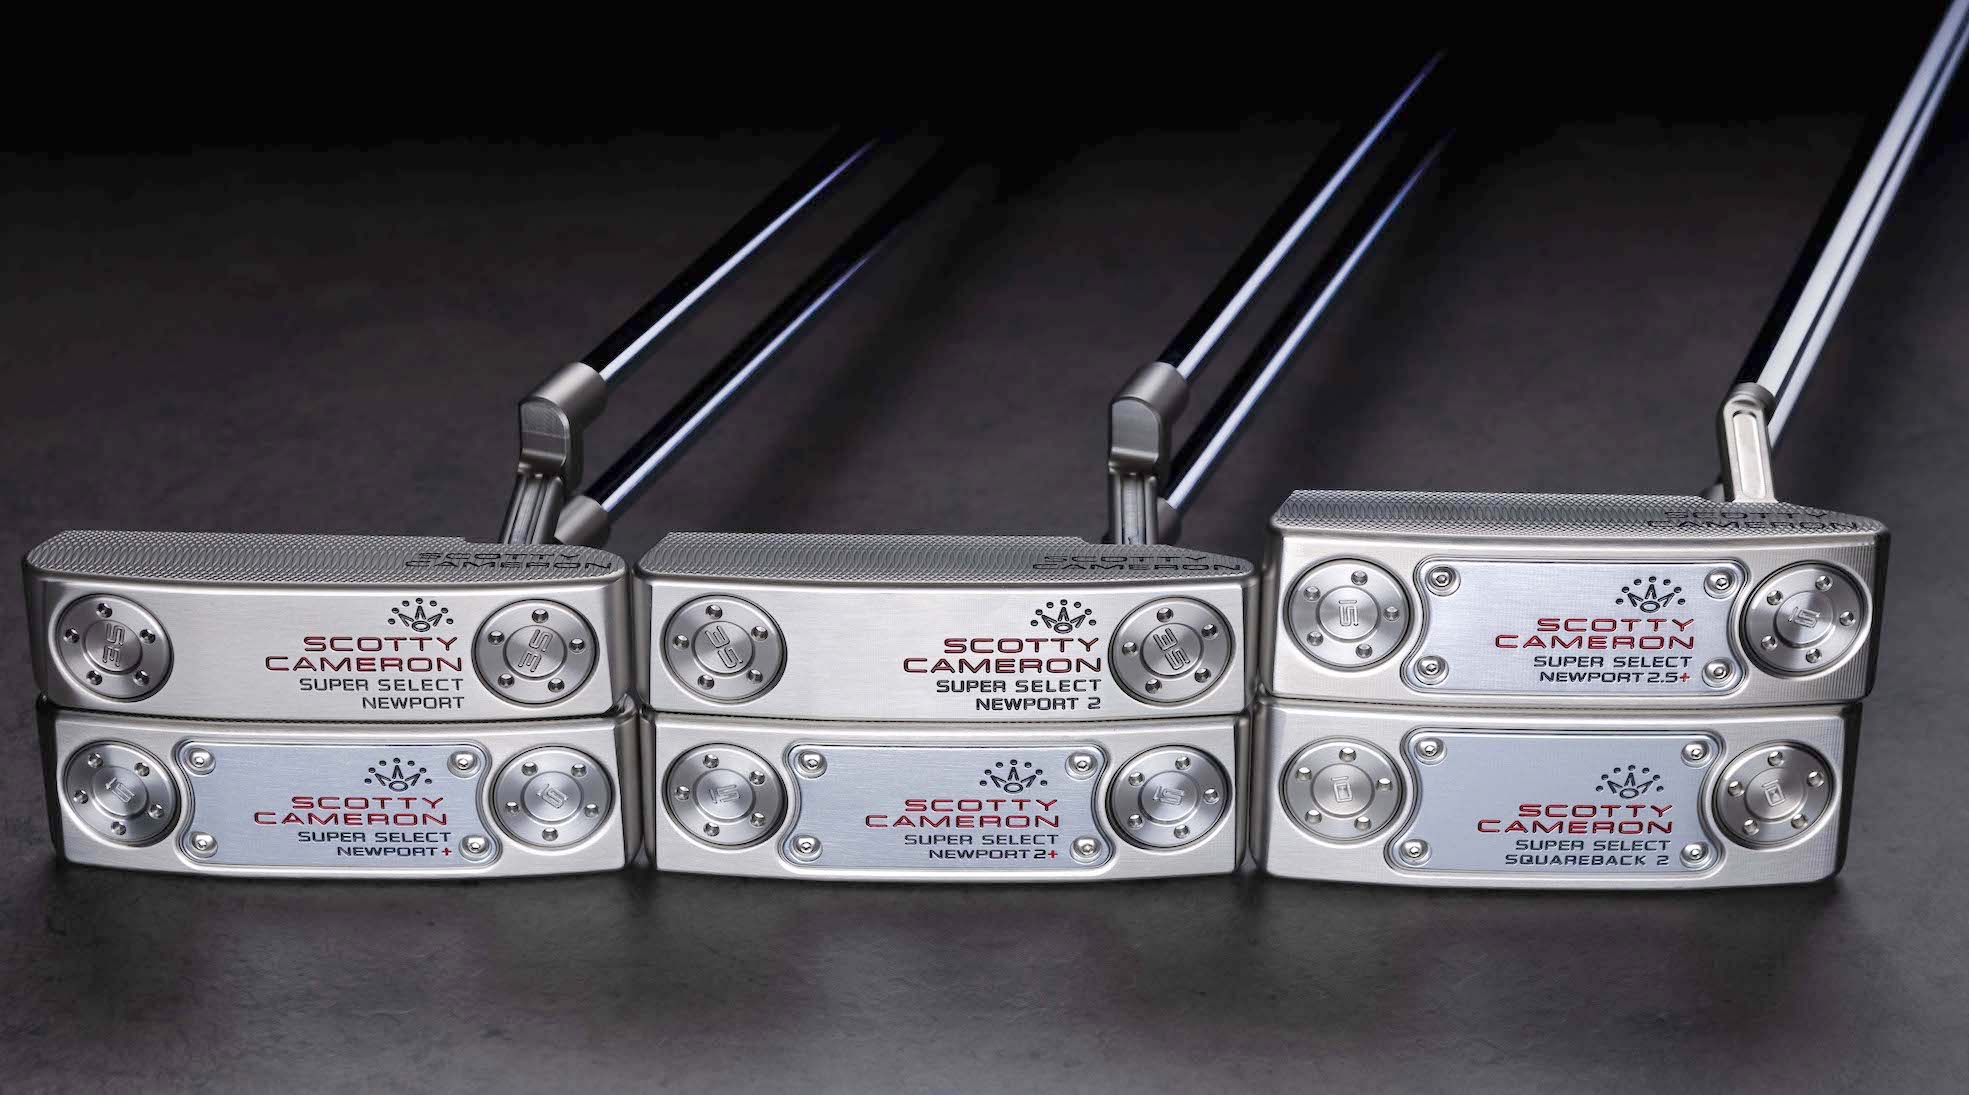 The Scotty Cameron Super Select Newport and Plus Models